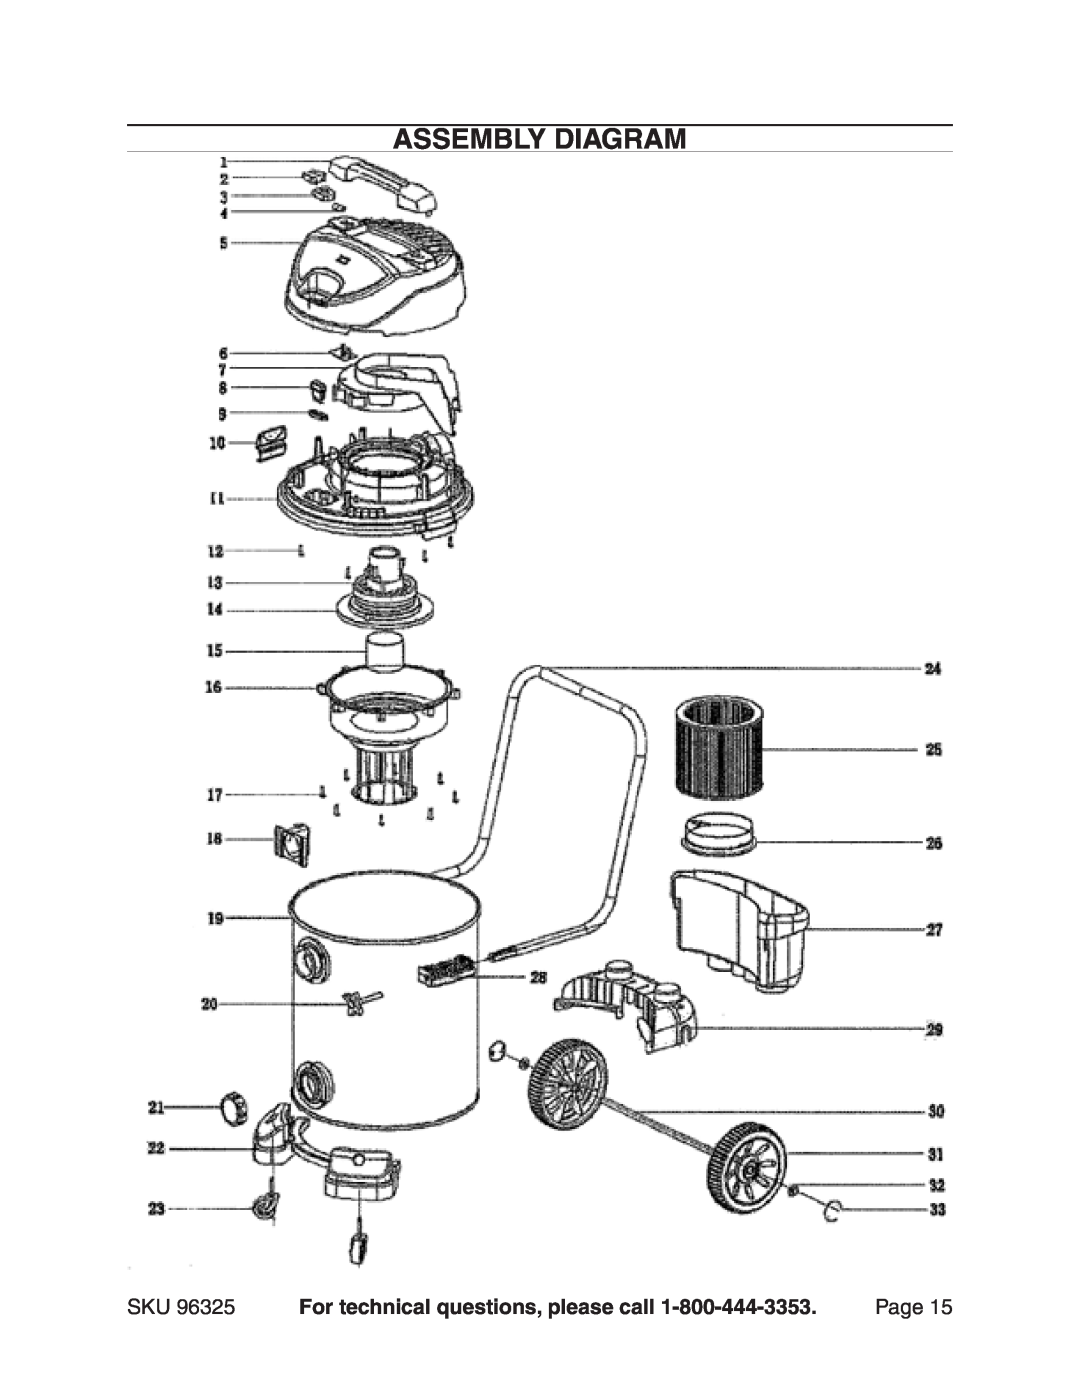 Harbor Freight Tools 96325 manual Assembly Diagram, For technical questions, please call, Page 